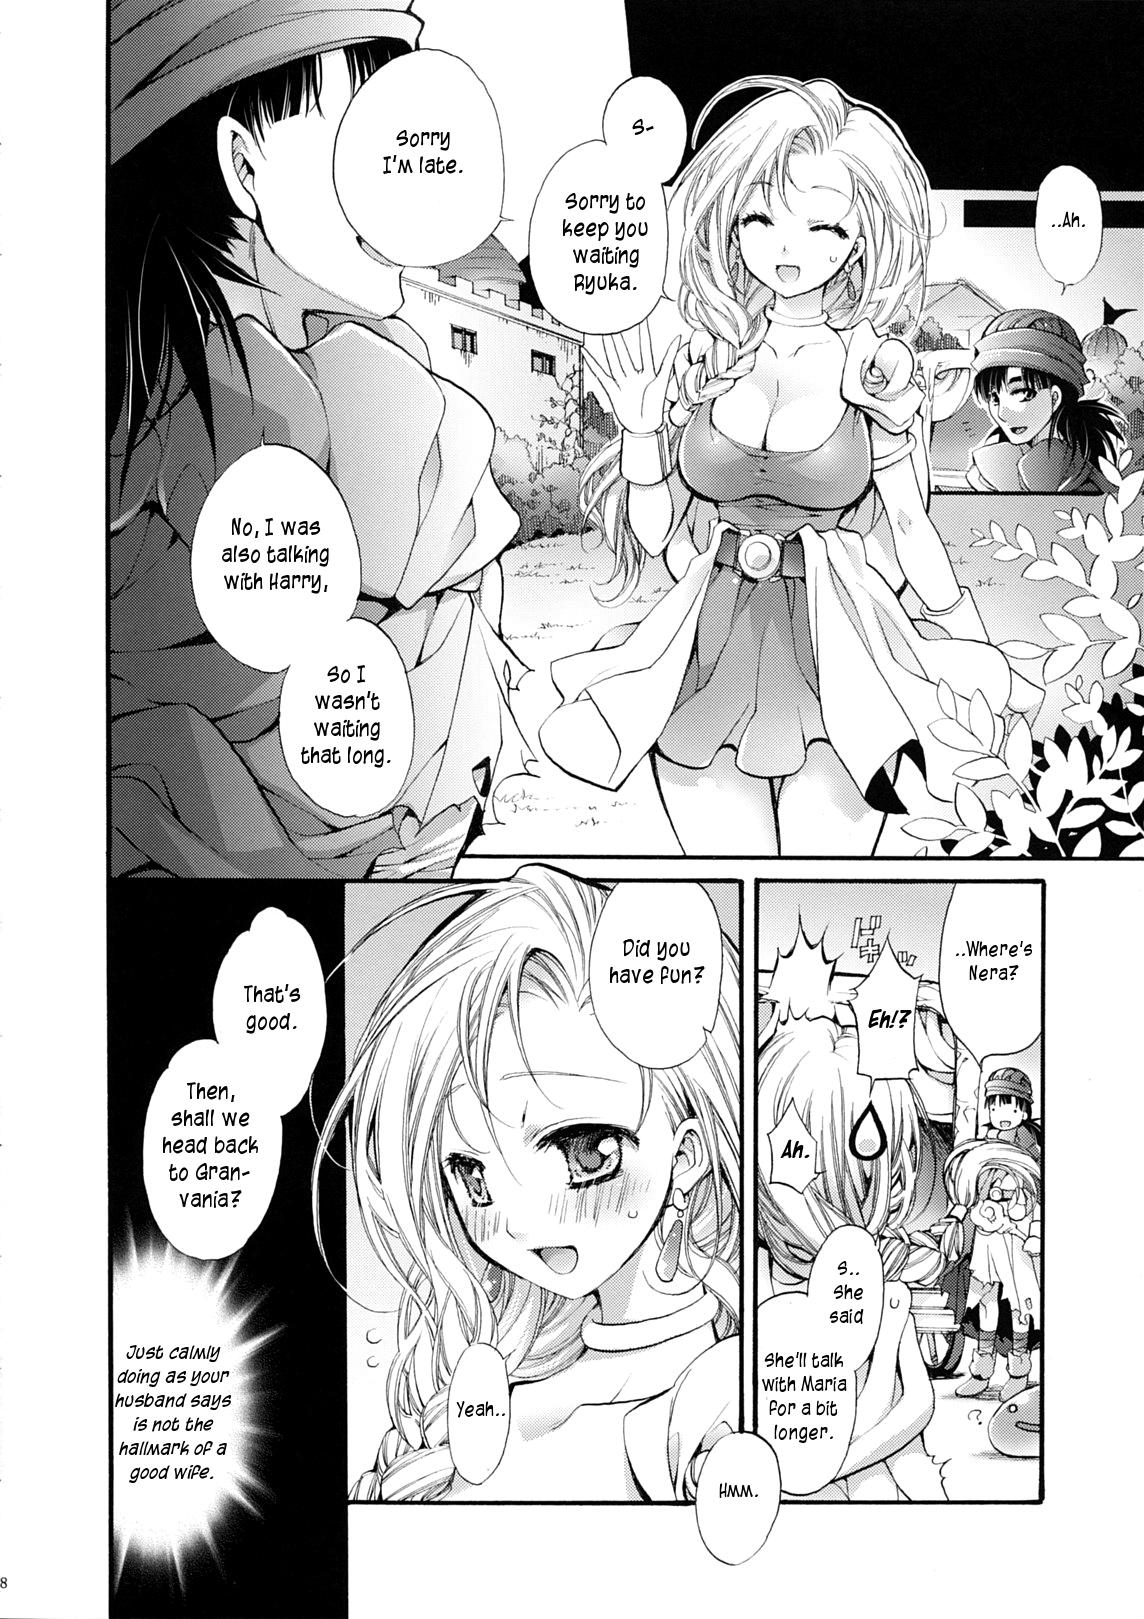 White Girl Hitomi no Naka no Sora | The Sky In Your Eyes - Dragon quest v Taboo - Page 7